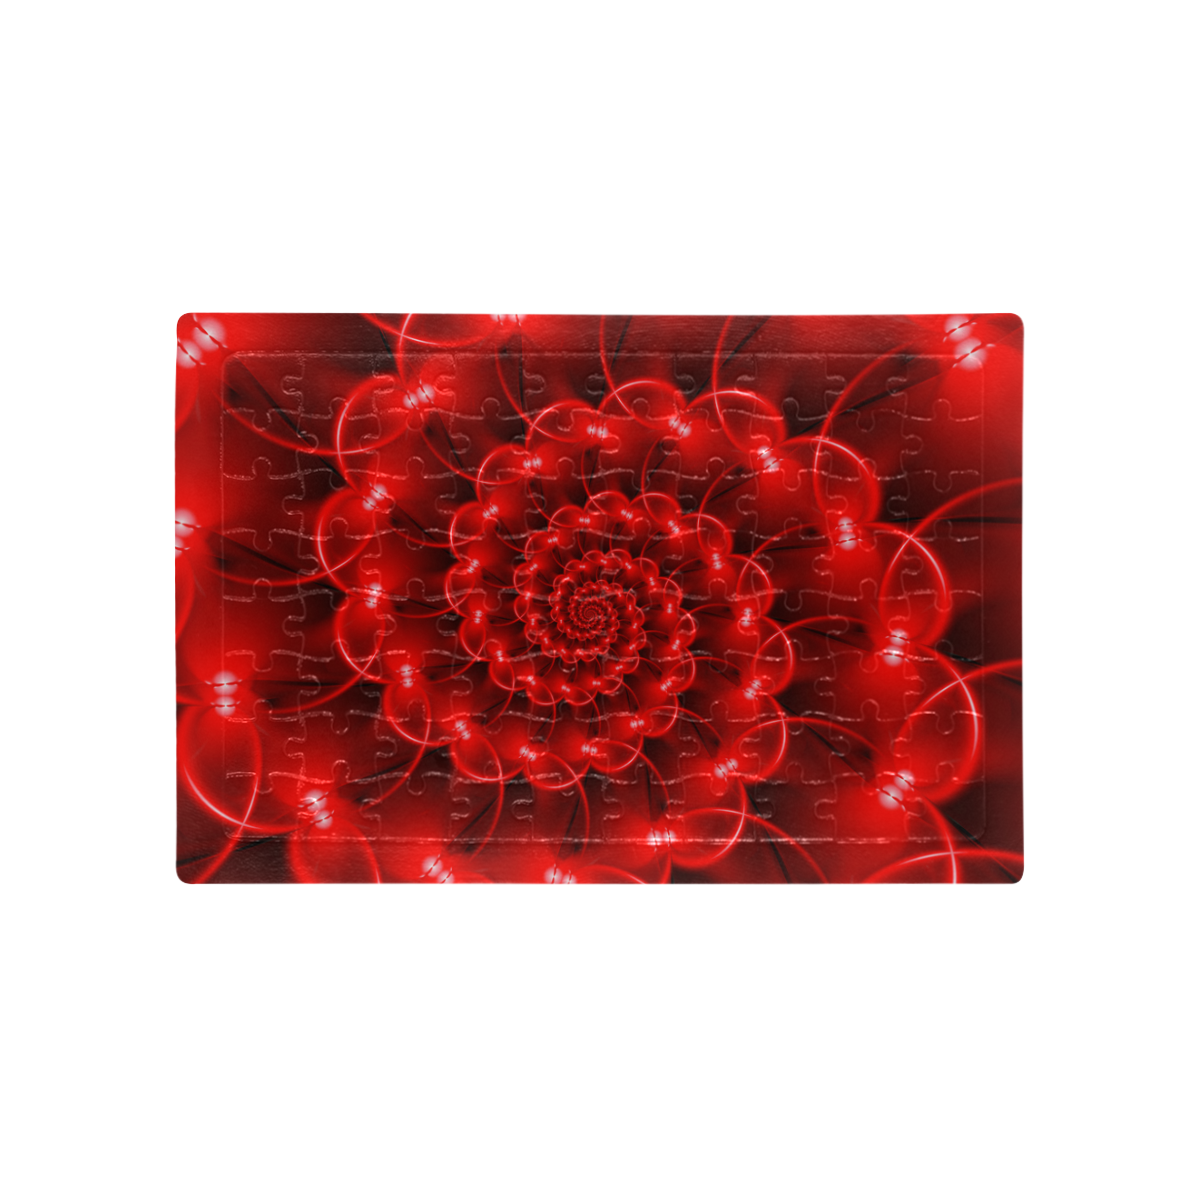 Red Spiral Fractal Puzzle A4 Size Jigsaw Puzzle (Set of 80 Pieces)